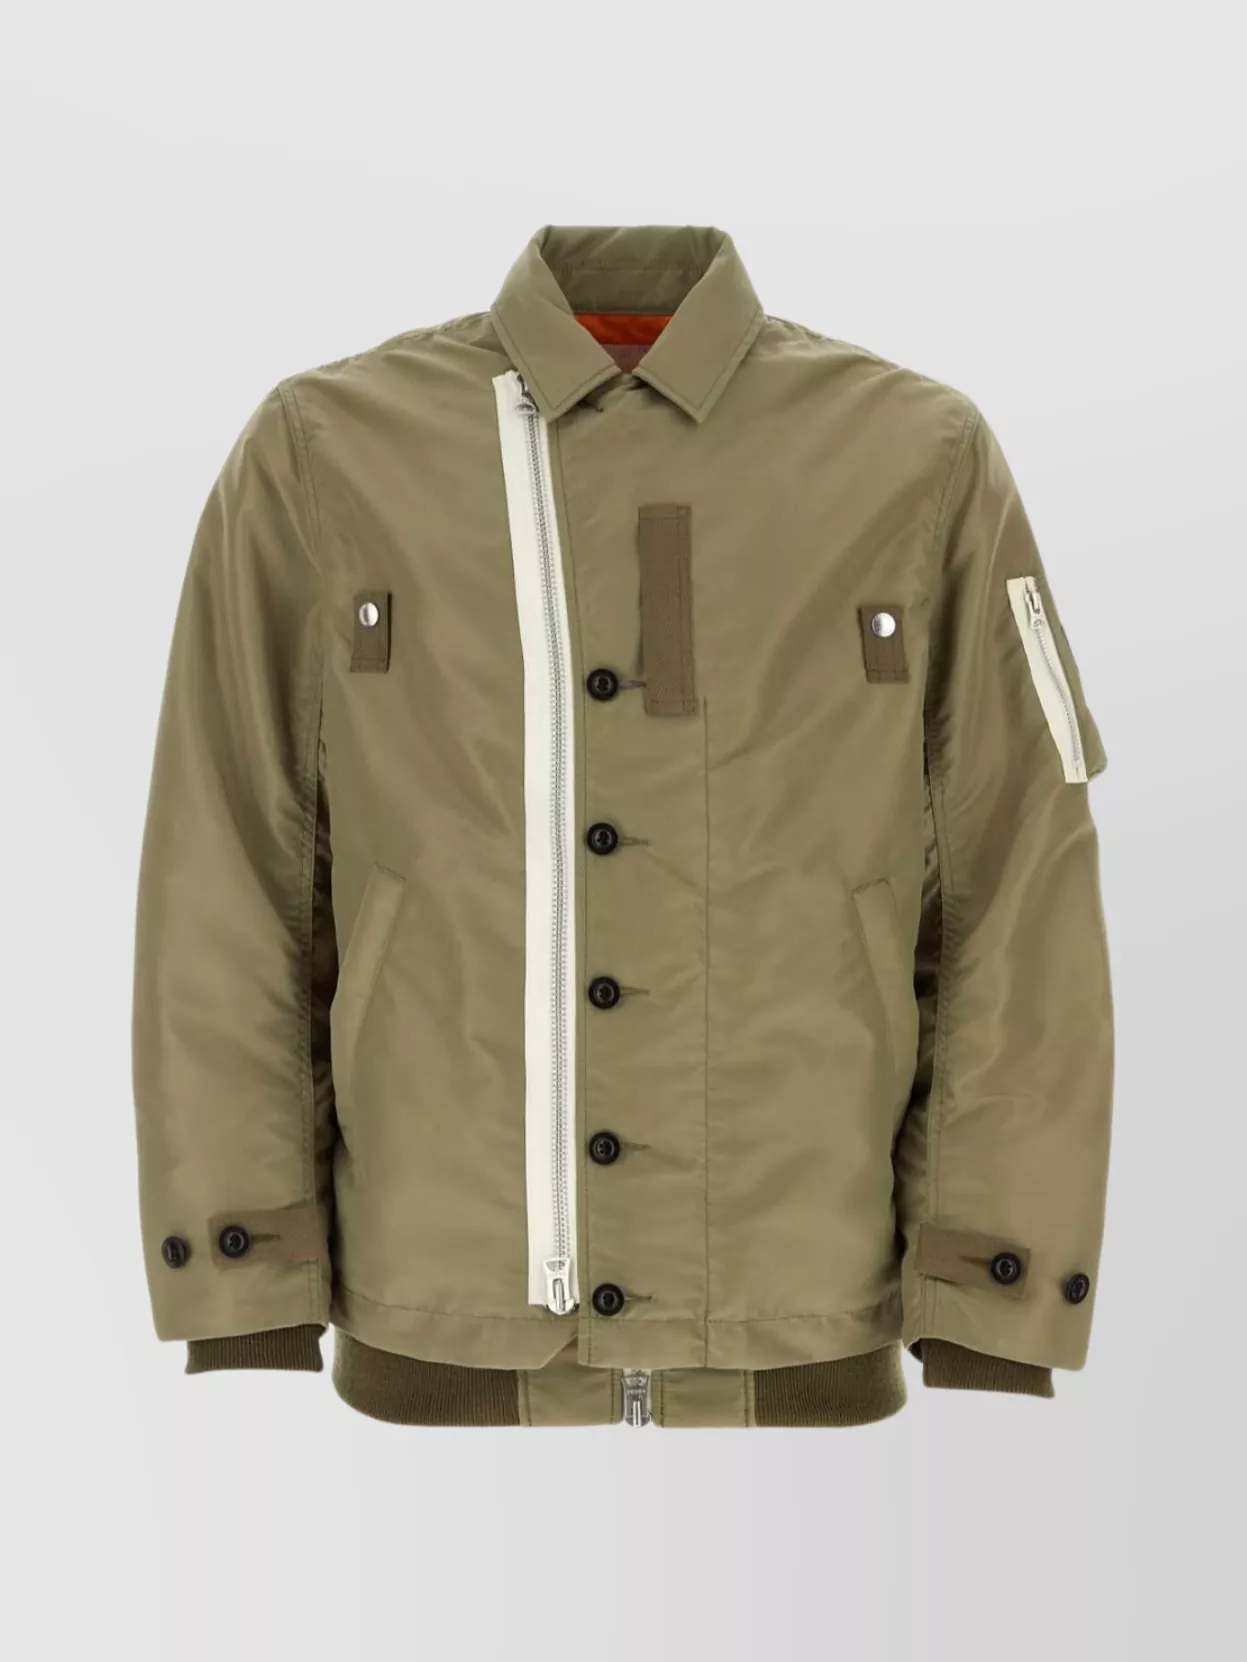 Sacai Nylon Jacket With Stand-up Collar And Utility Pockets